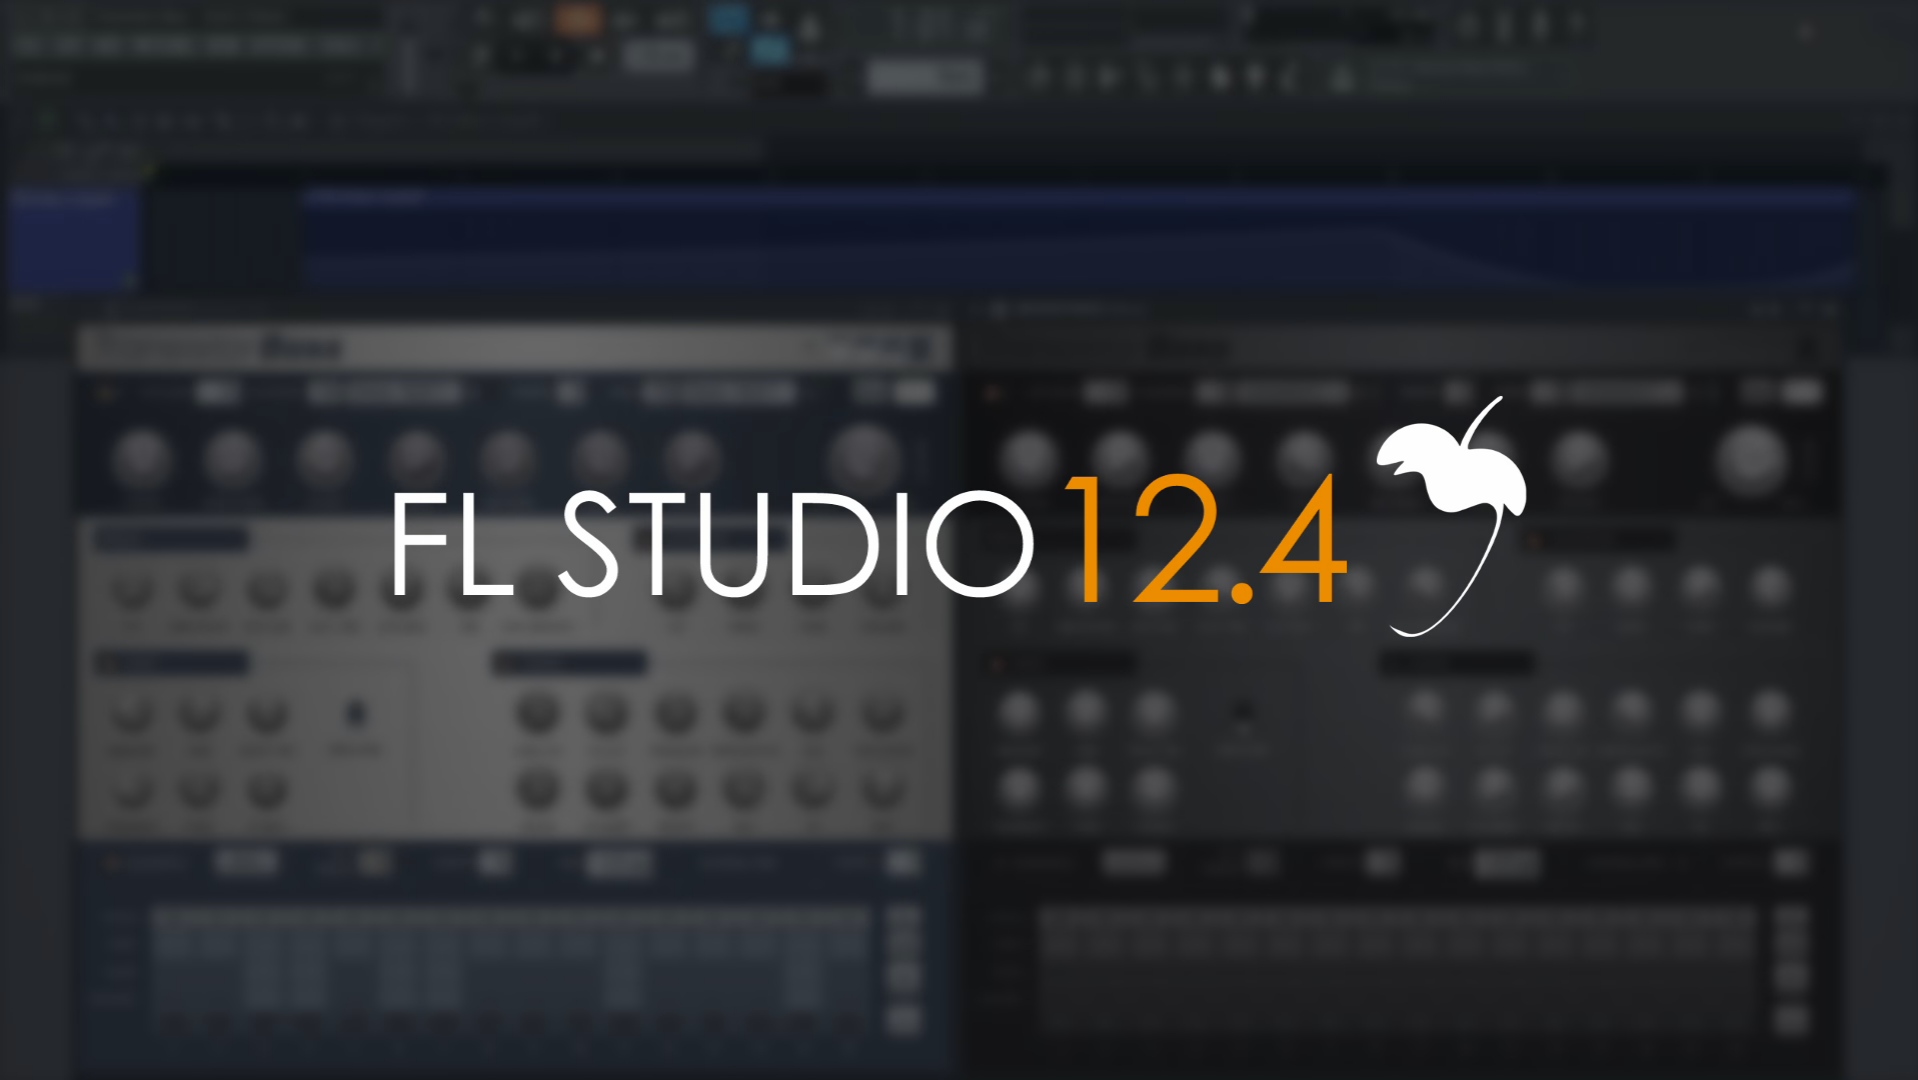 FL Studio 12.4 update adds mobile integration and more